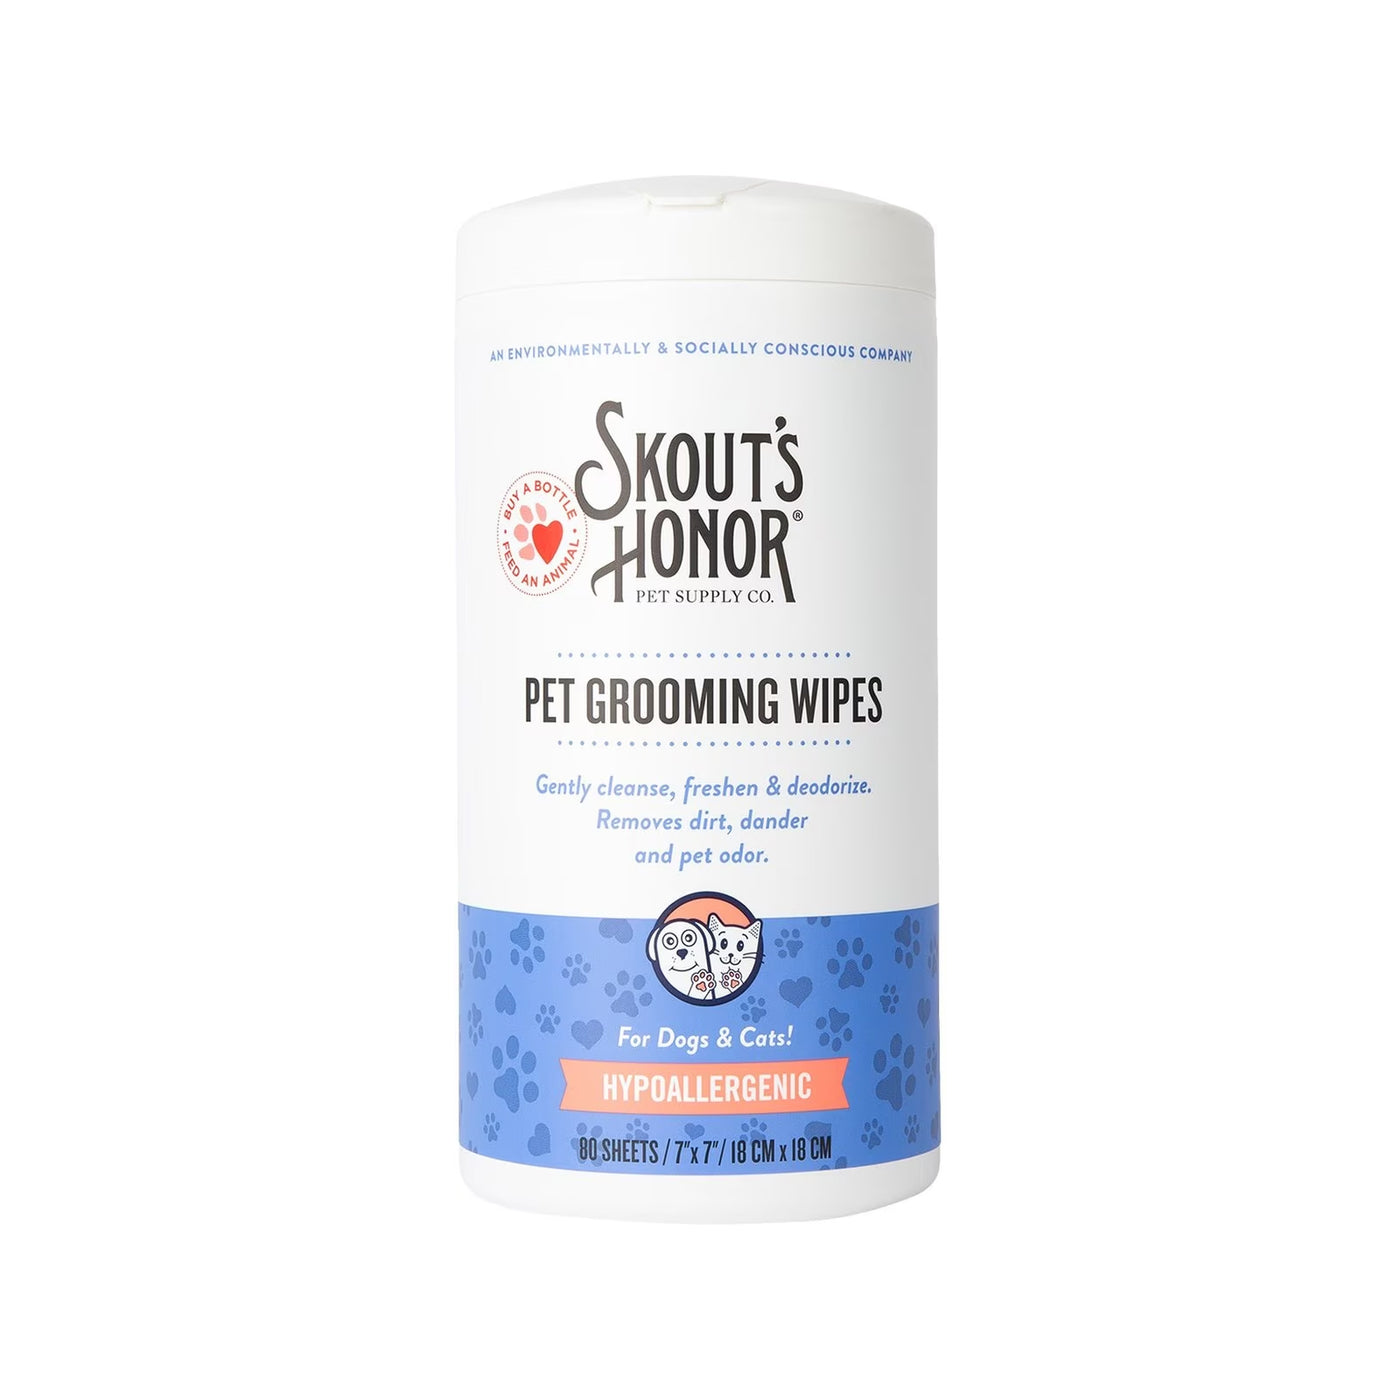 Hypoallergenic Grooming Wipes for Dogs & Cats 80ct